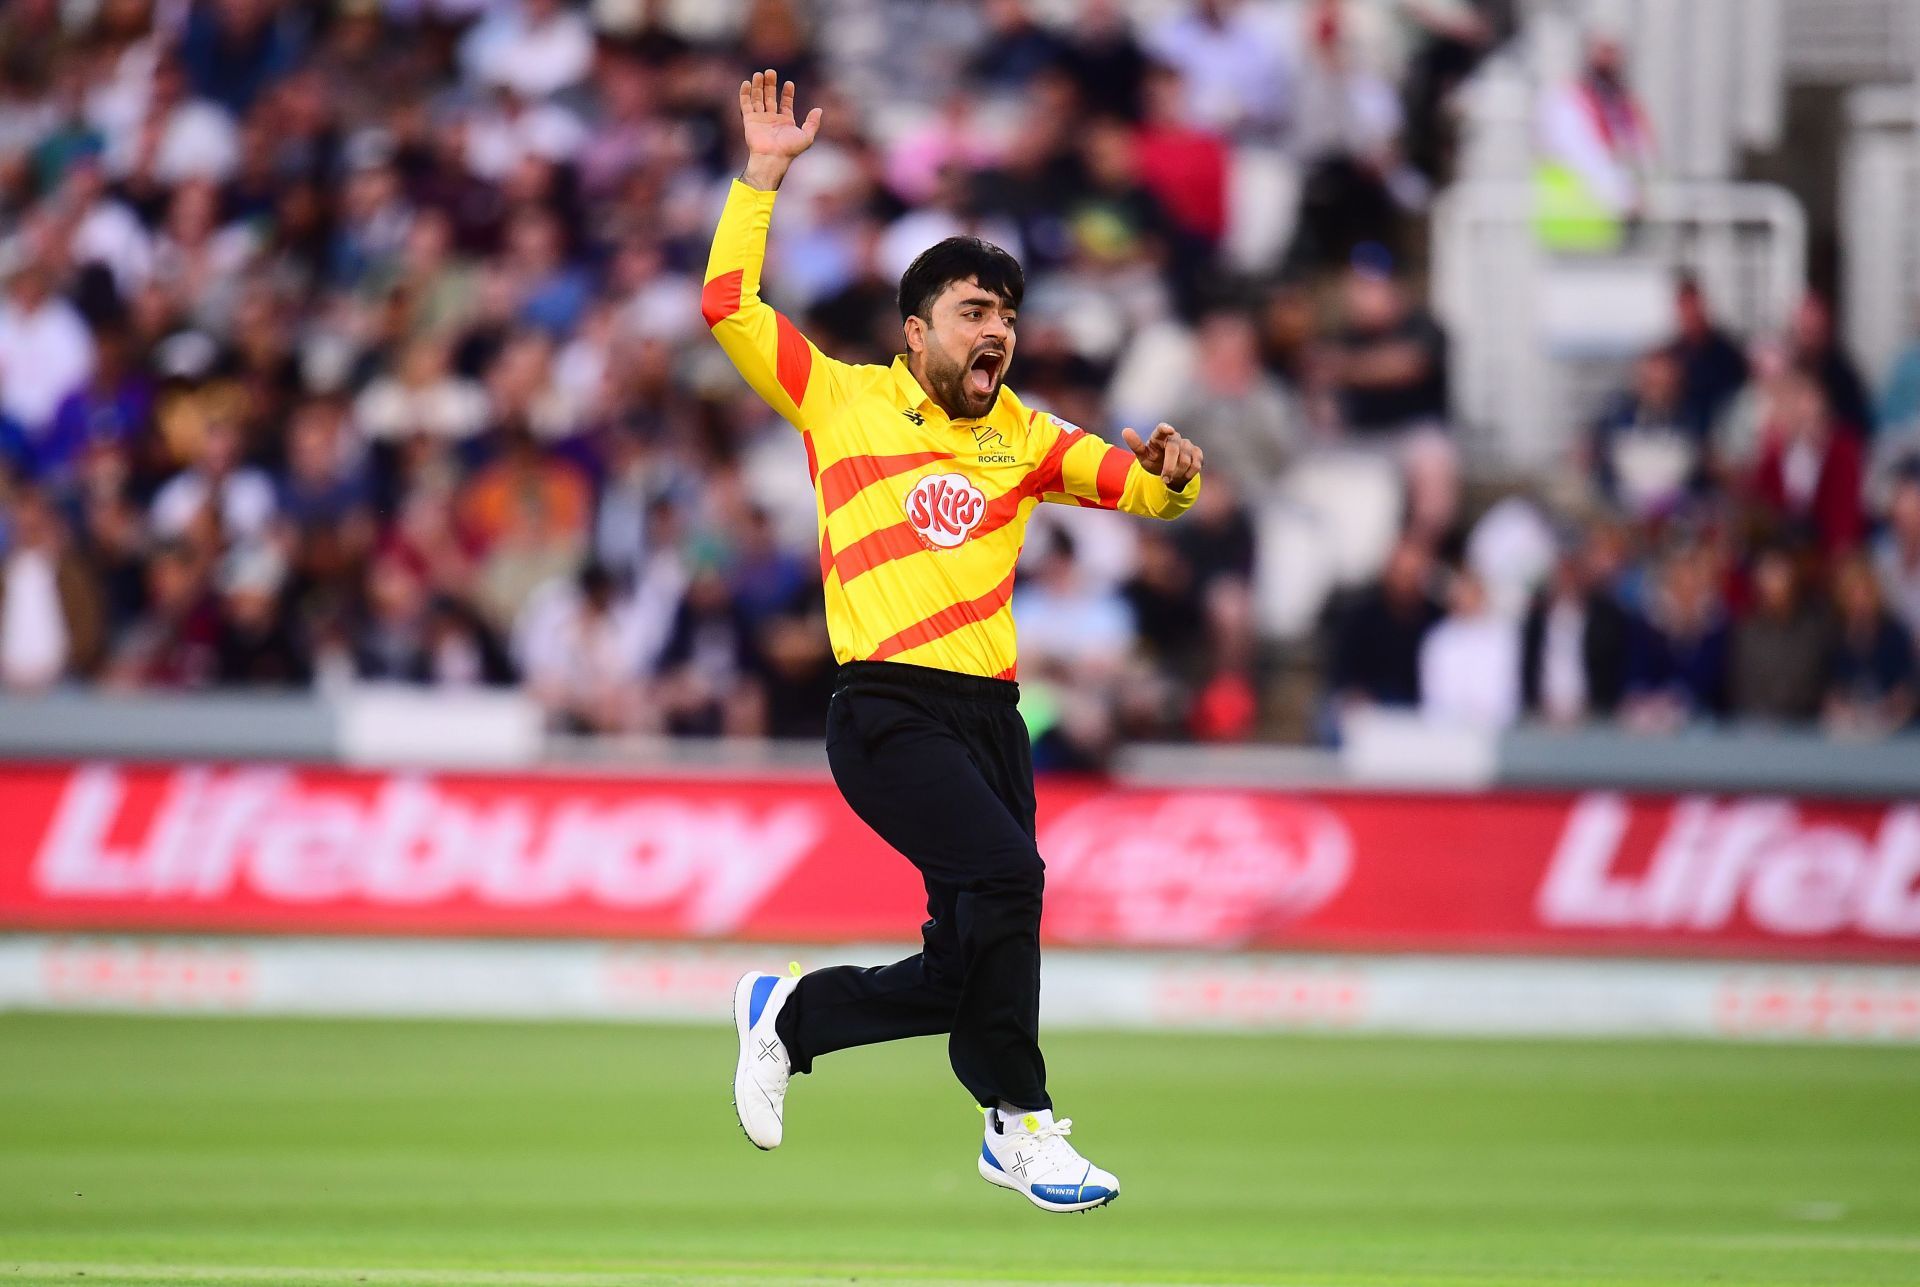 Rashid Khan has been released ahead of the IPL 2022 Auction